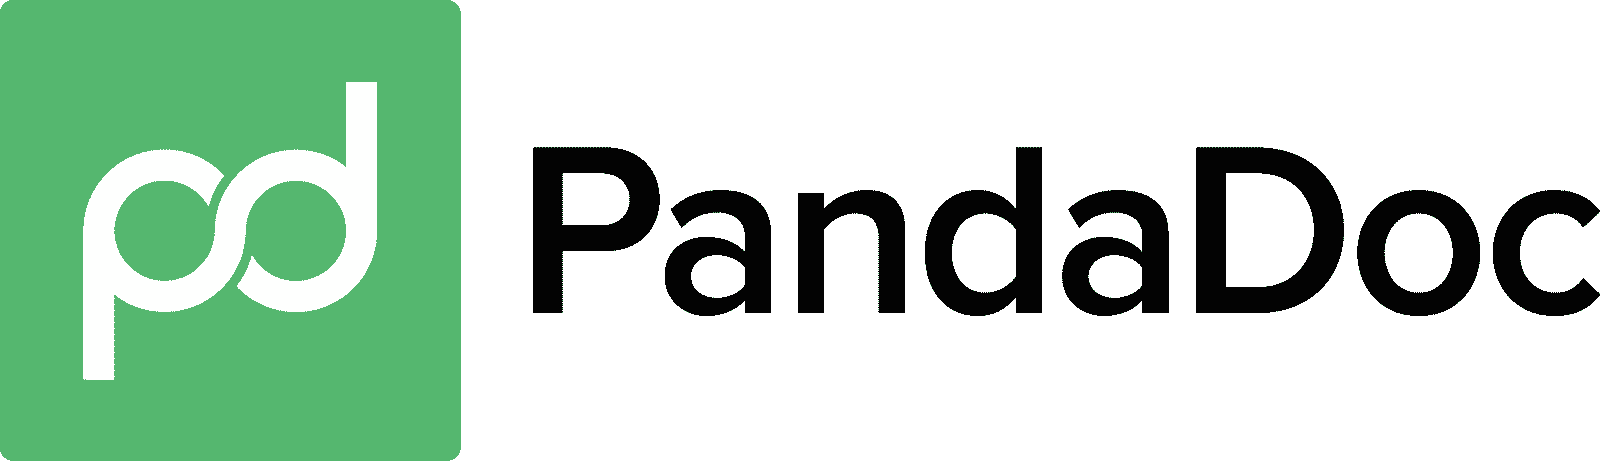 PandaDoc - pricing, customer reviews, features, free plans, alternatives, comparisons, service costs.